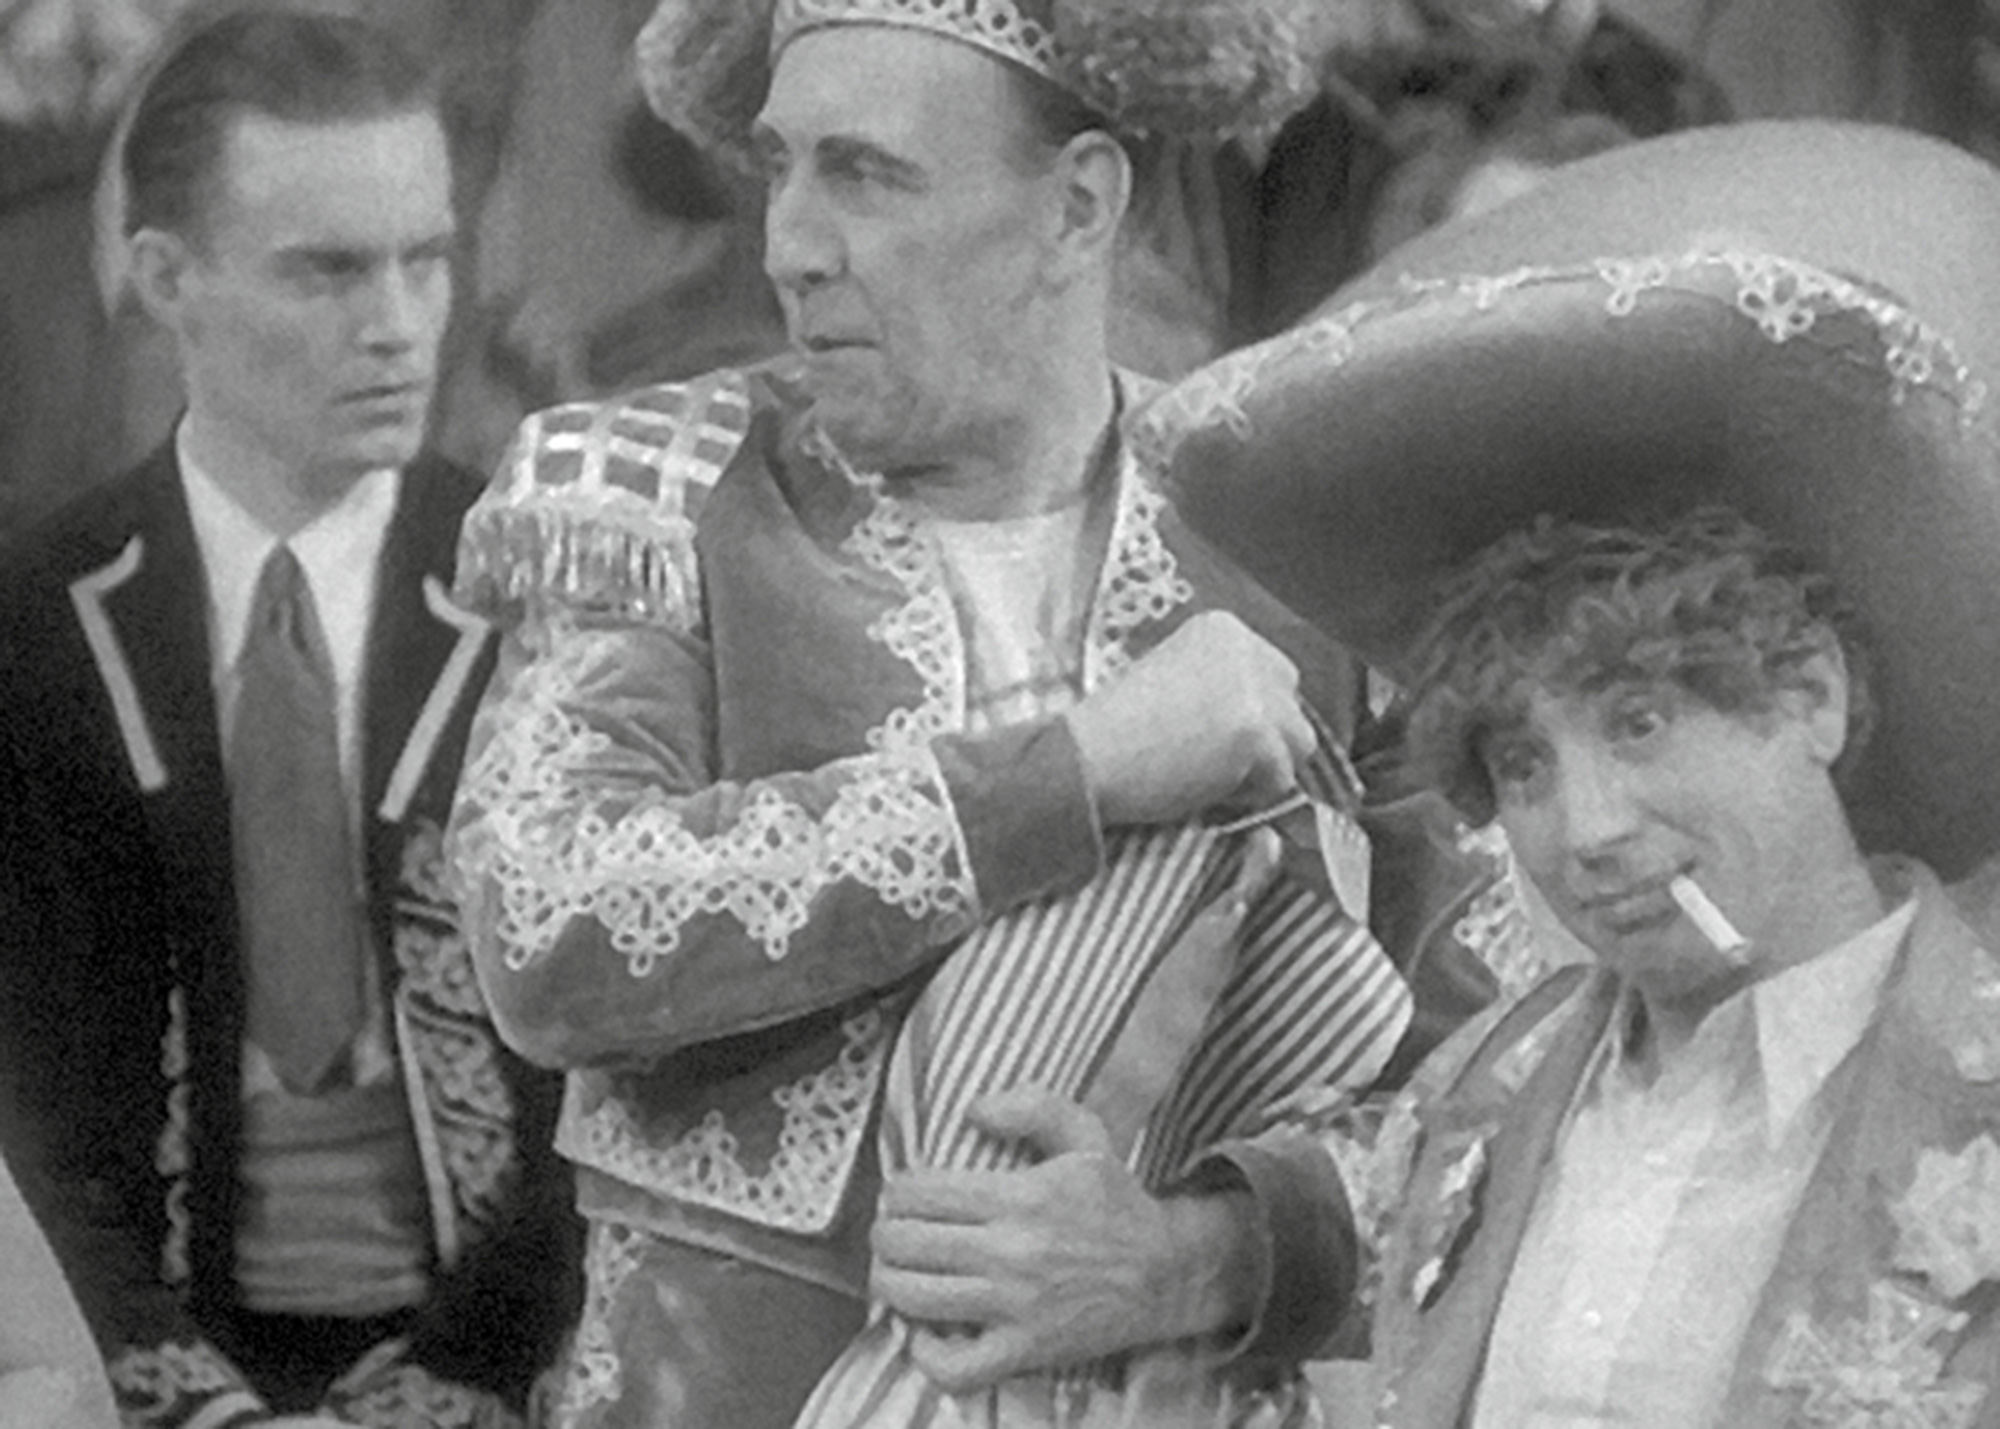 A still from the nineteen twenty nine film “The Cocoanuts” depicting Harpo Marx and his cigarillo.